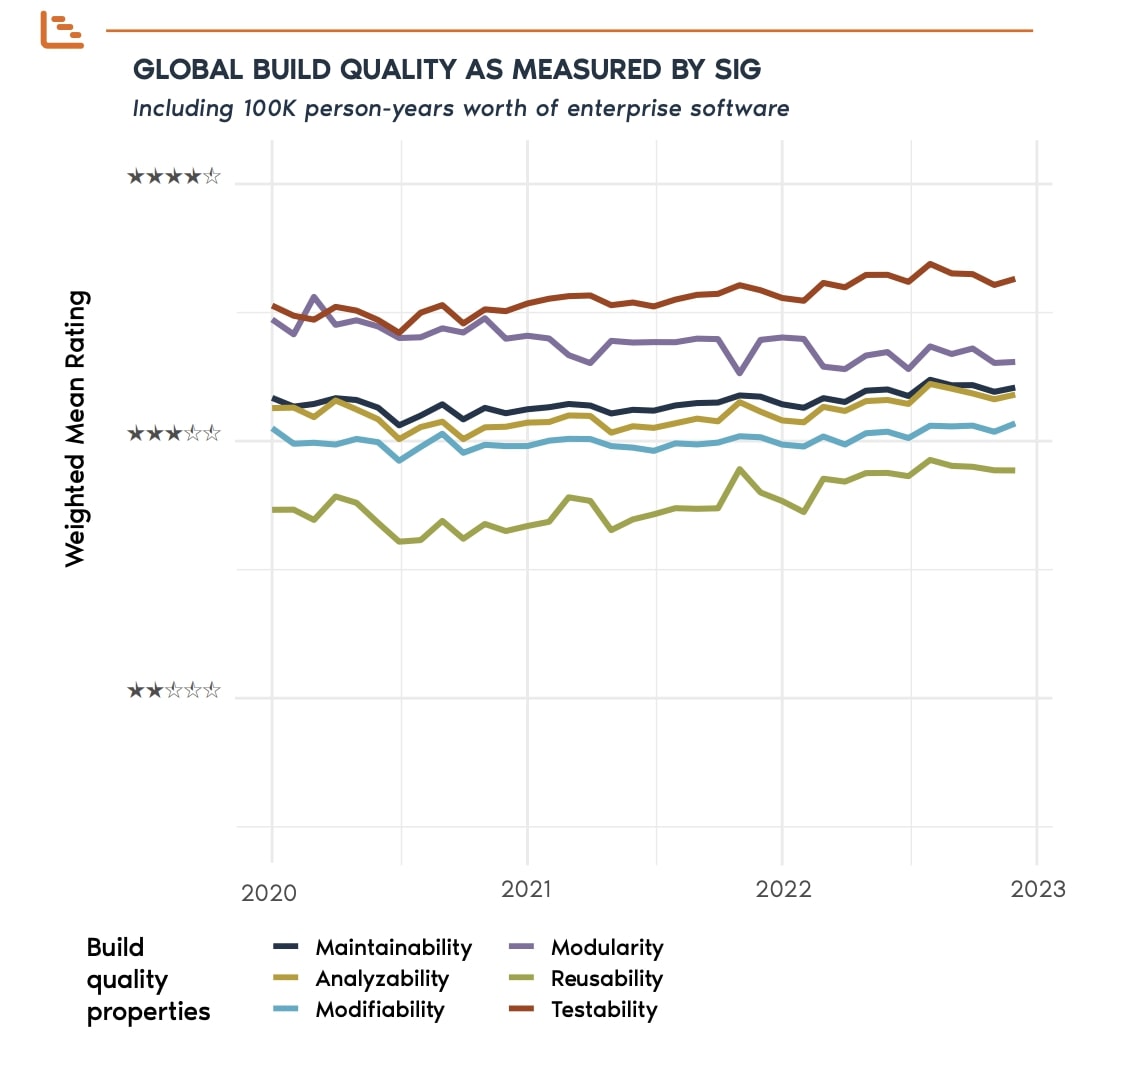 A detailed graph showing the current trend of main build quality properties; Maintainability, Modularity, Analyzability, Reusability, Modifiability, Testability. all Graph shows a moderate growing trend and covers the time period between 2020 and 2023.